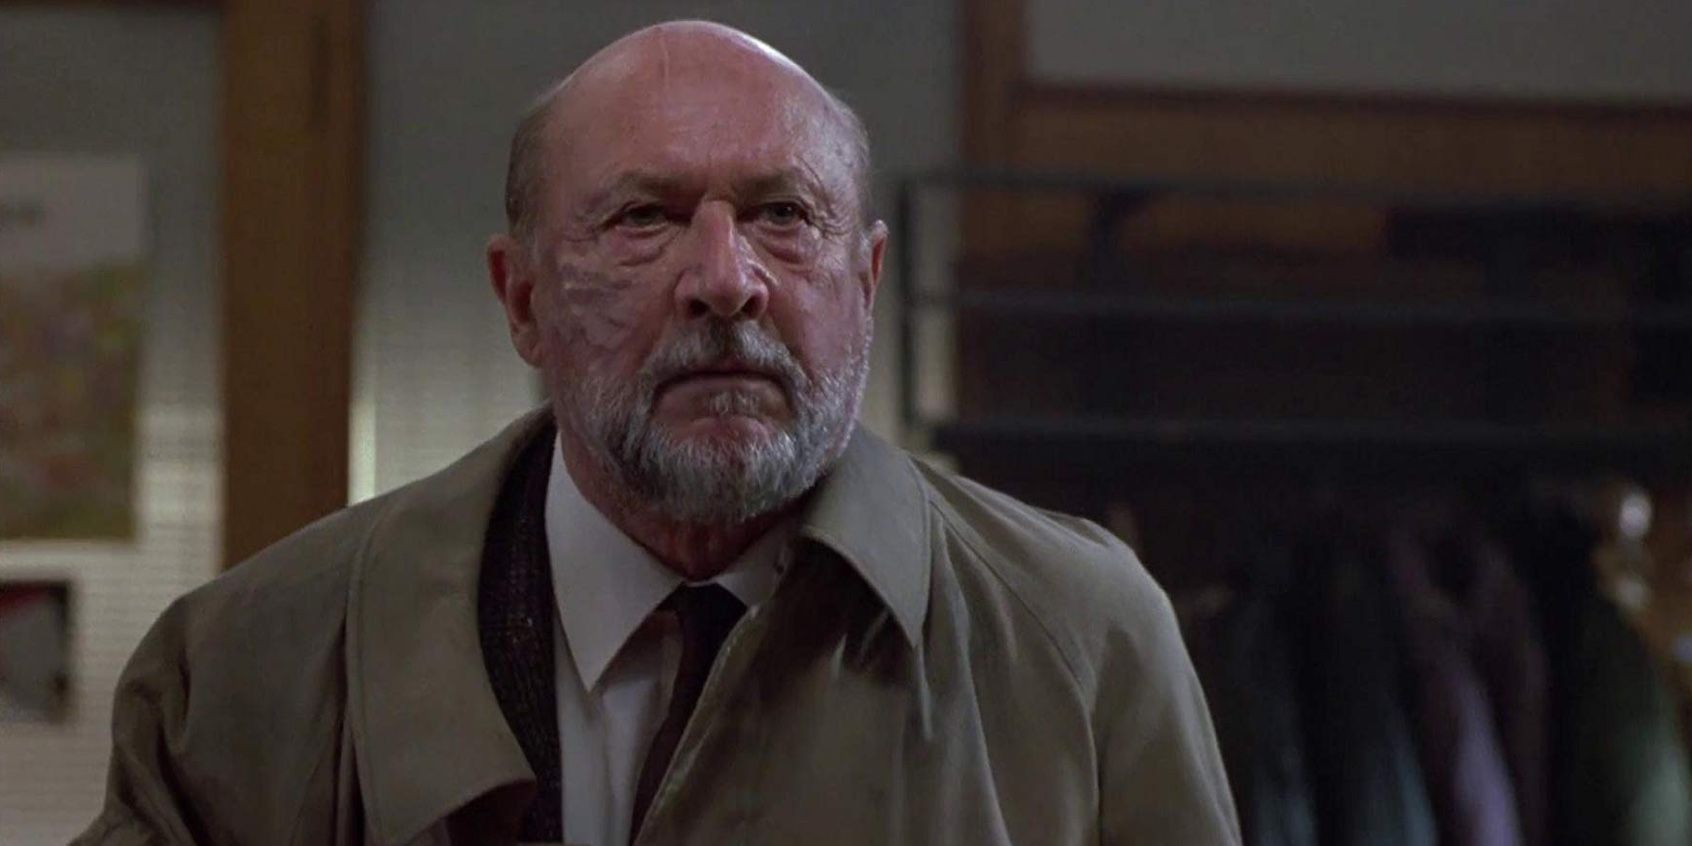 Donald Pleasance as Dr. Loomis in Halloween 4 with burns